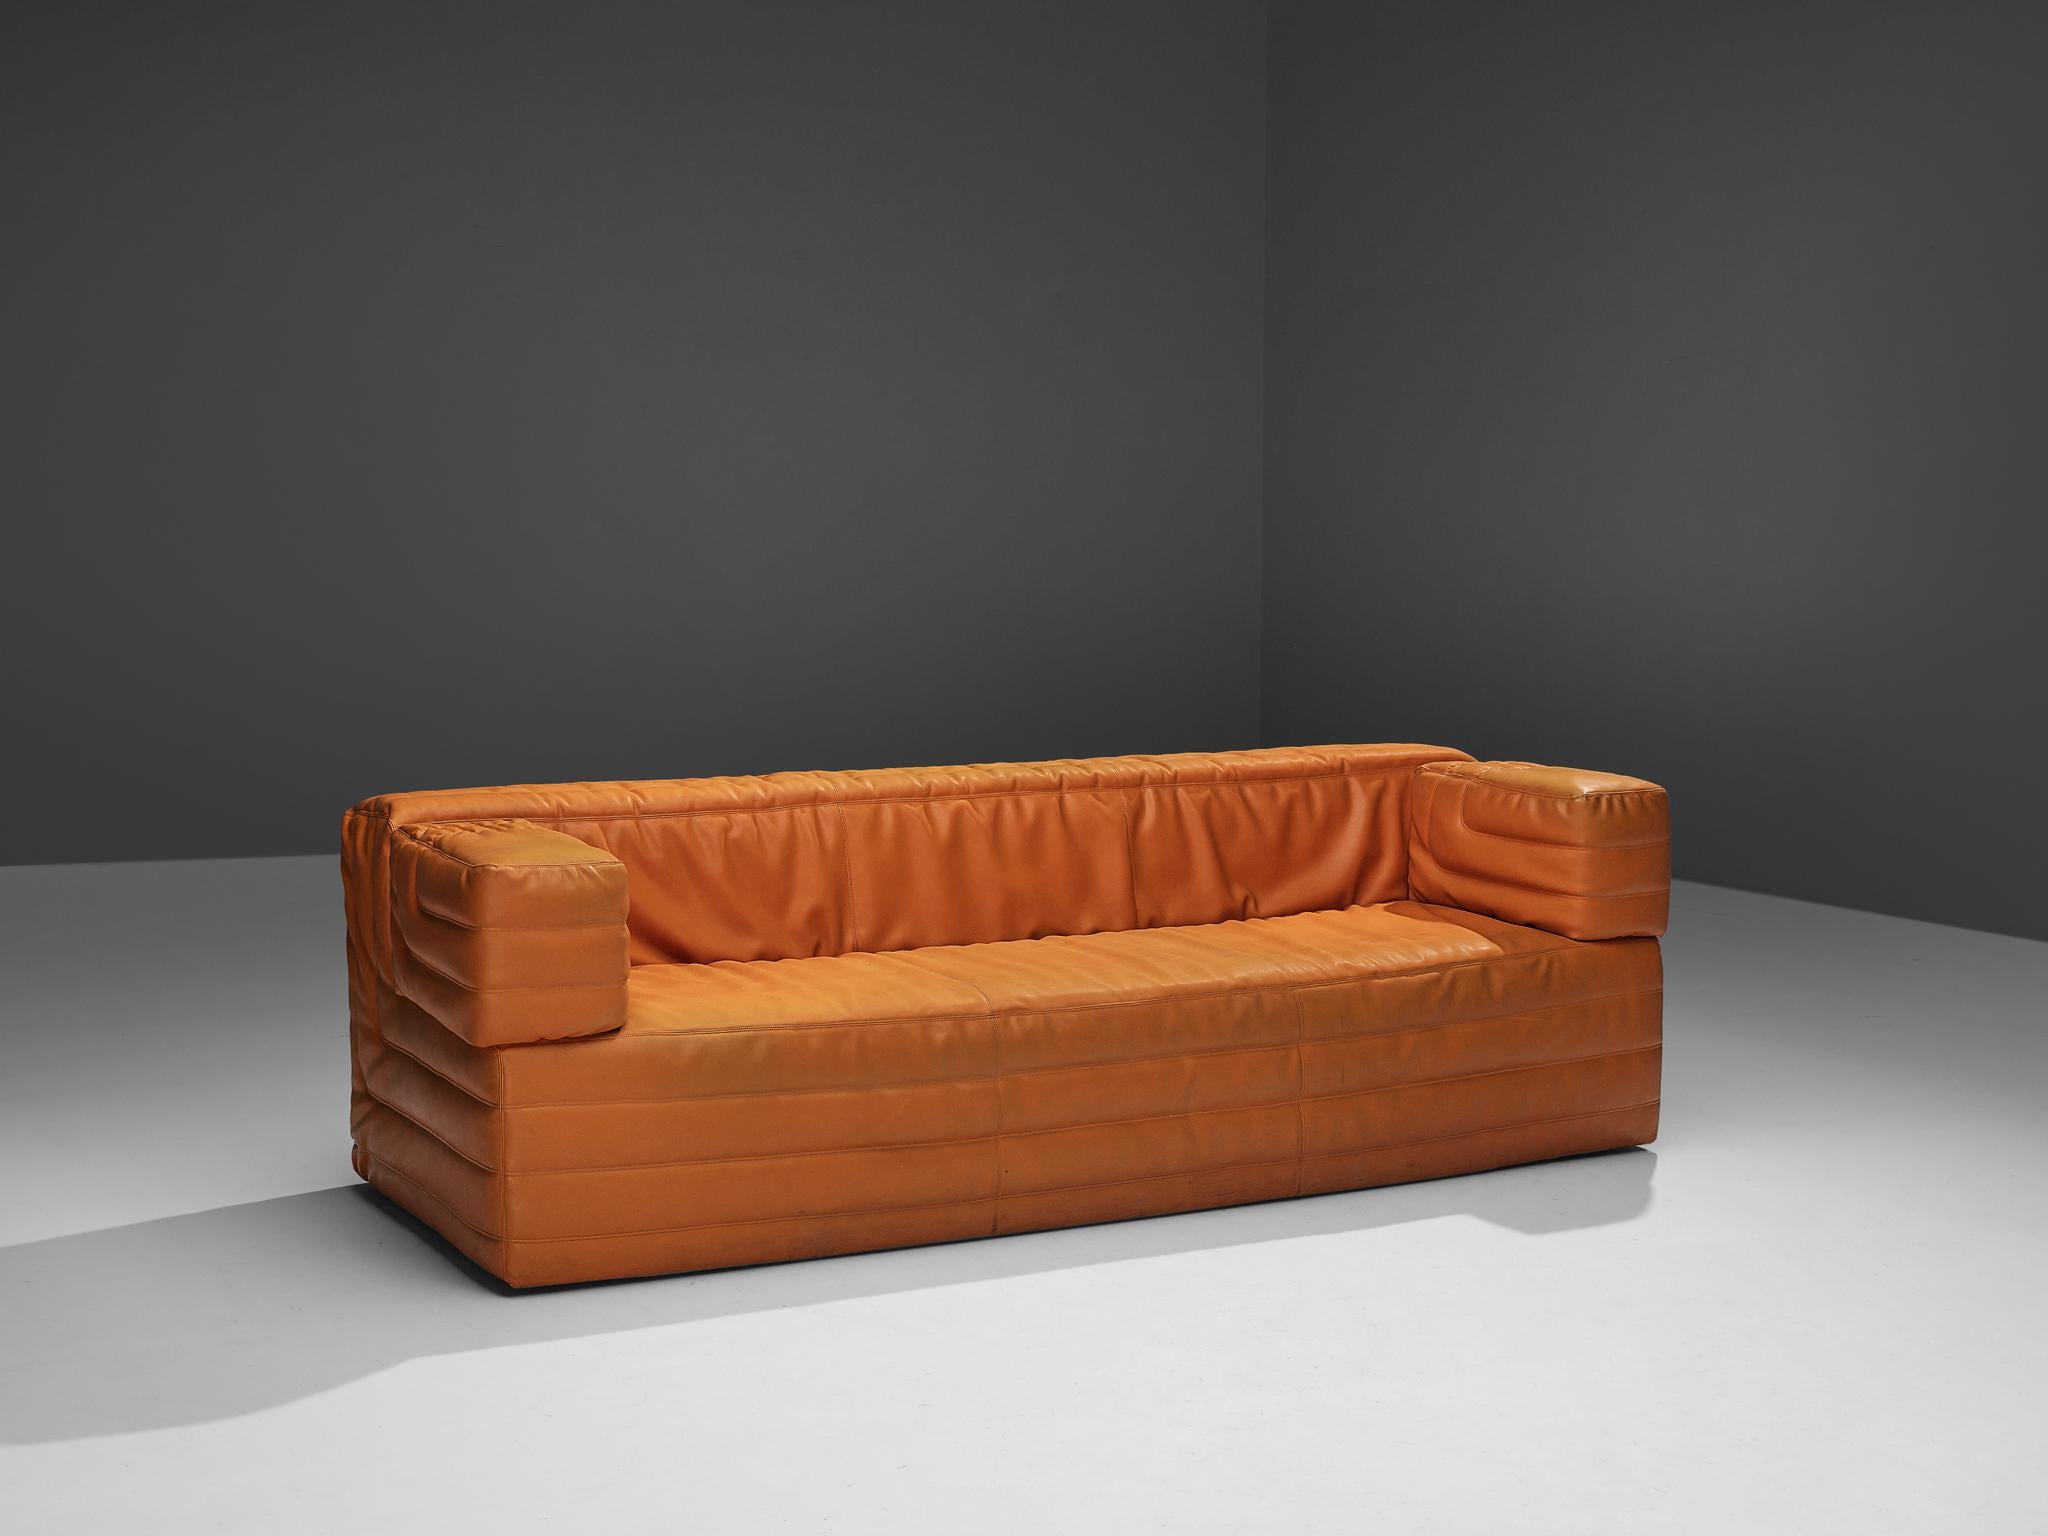 Sofa, leatherette, Italy, 1970s

This striking sofa comes with an eye-catching orange colored faux leather upholstery that gives the room a vibrant and lively touch. The design is further characterized by geometrical sharp lines discernible on the